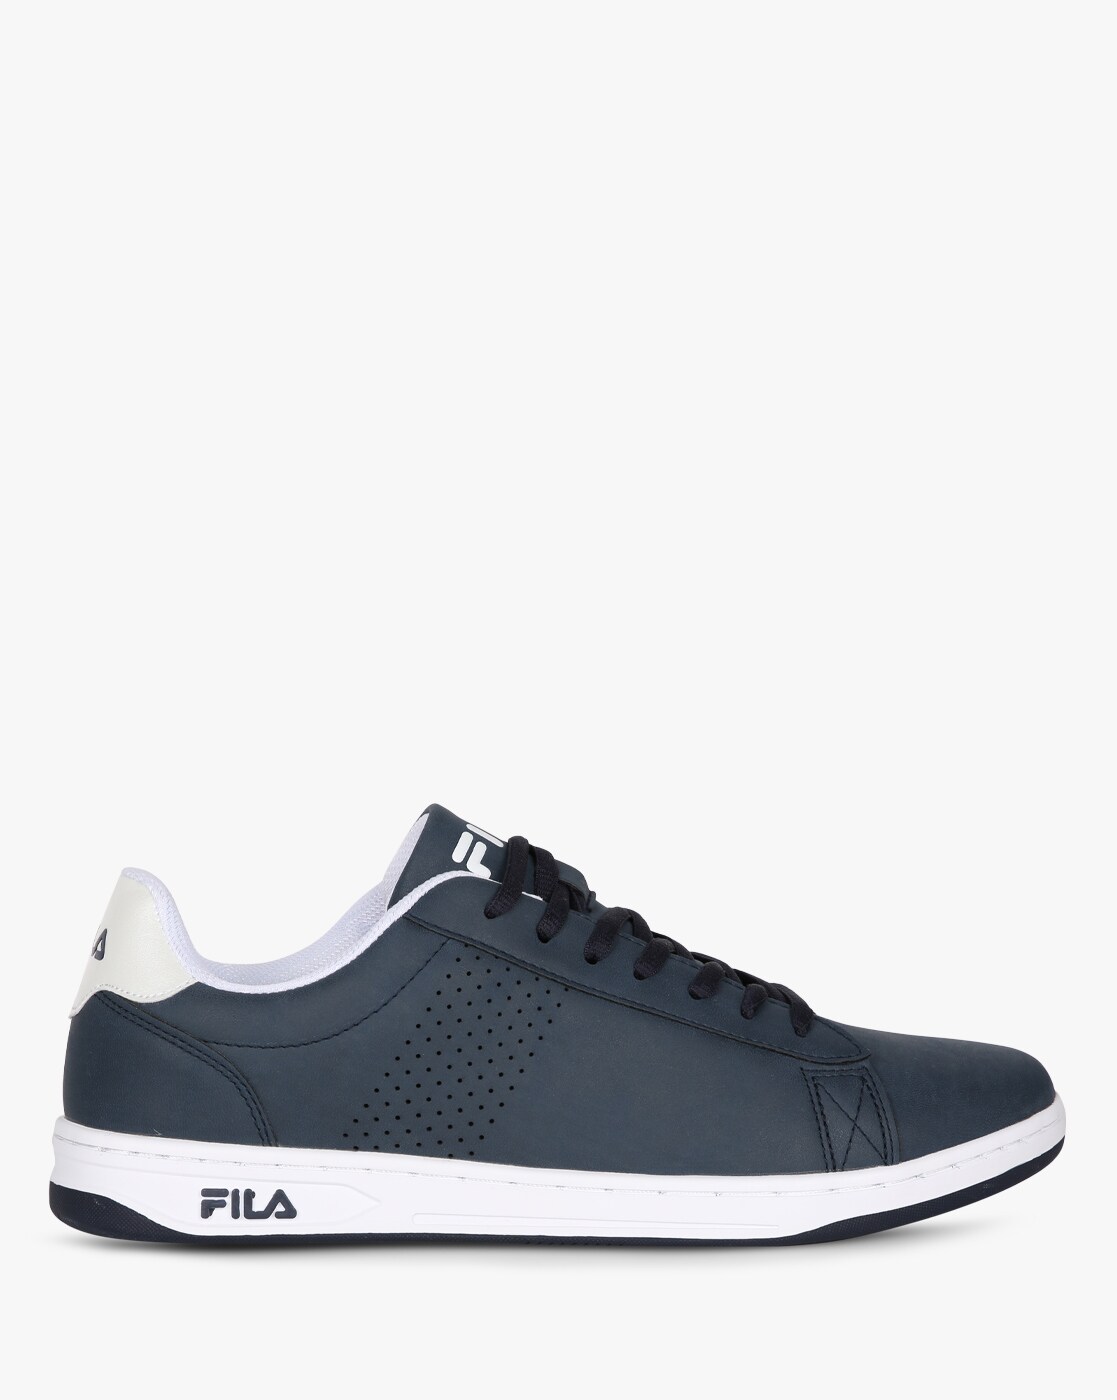 fila tractor shoes